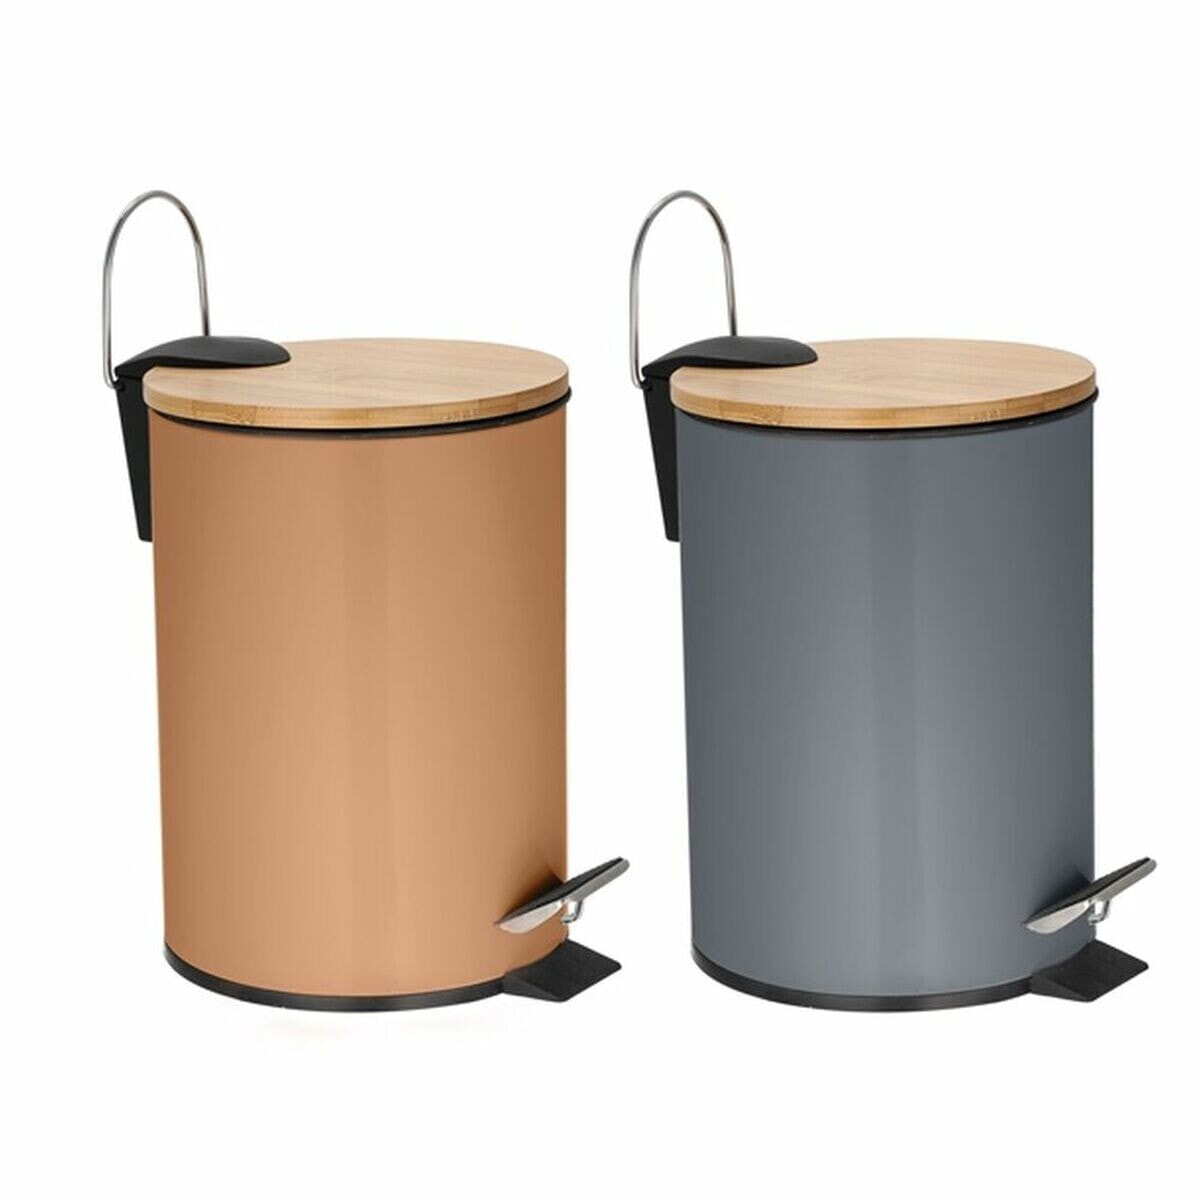 Waste bin with pedal DKD Home Decor Metal Bamboo 2 Units 3 L 17 x 17 x 22,5 cm